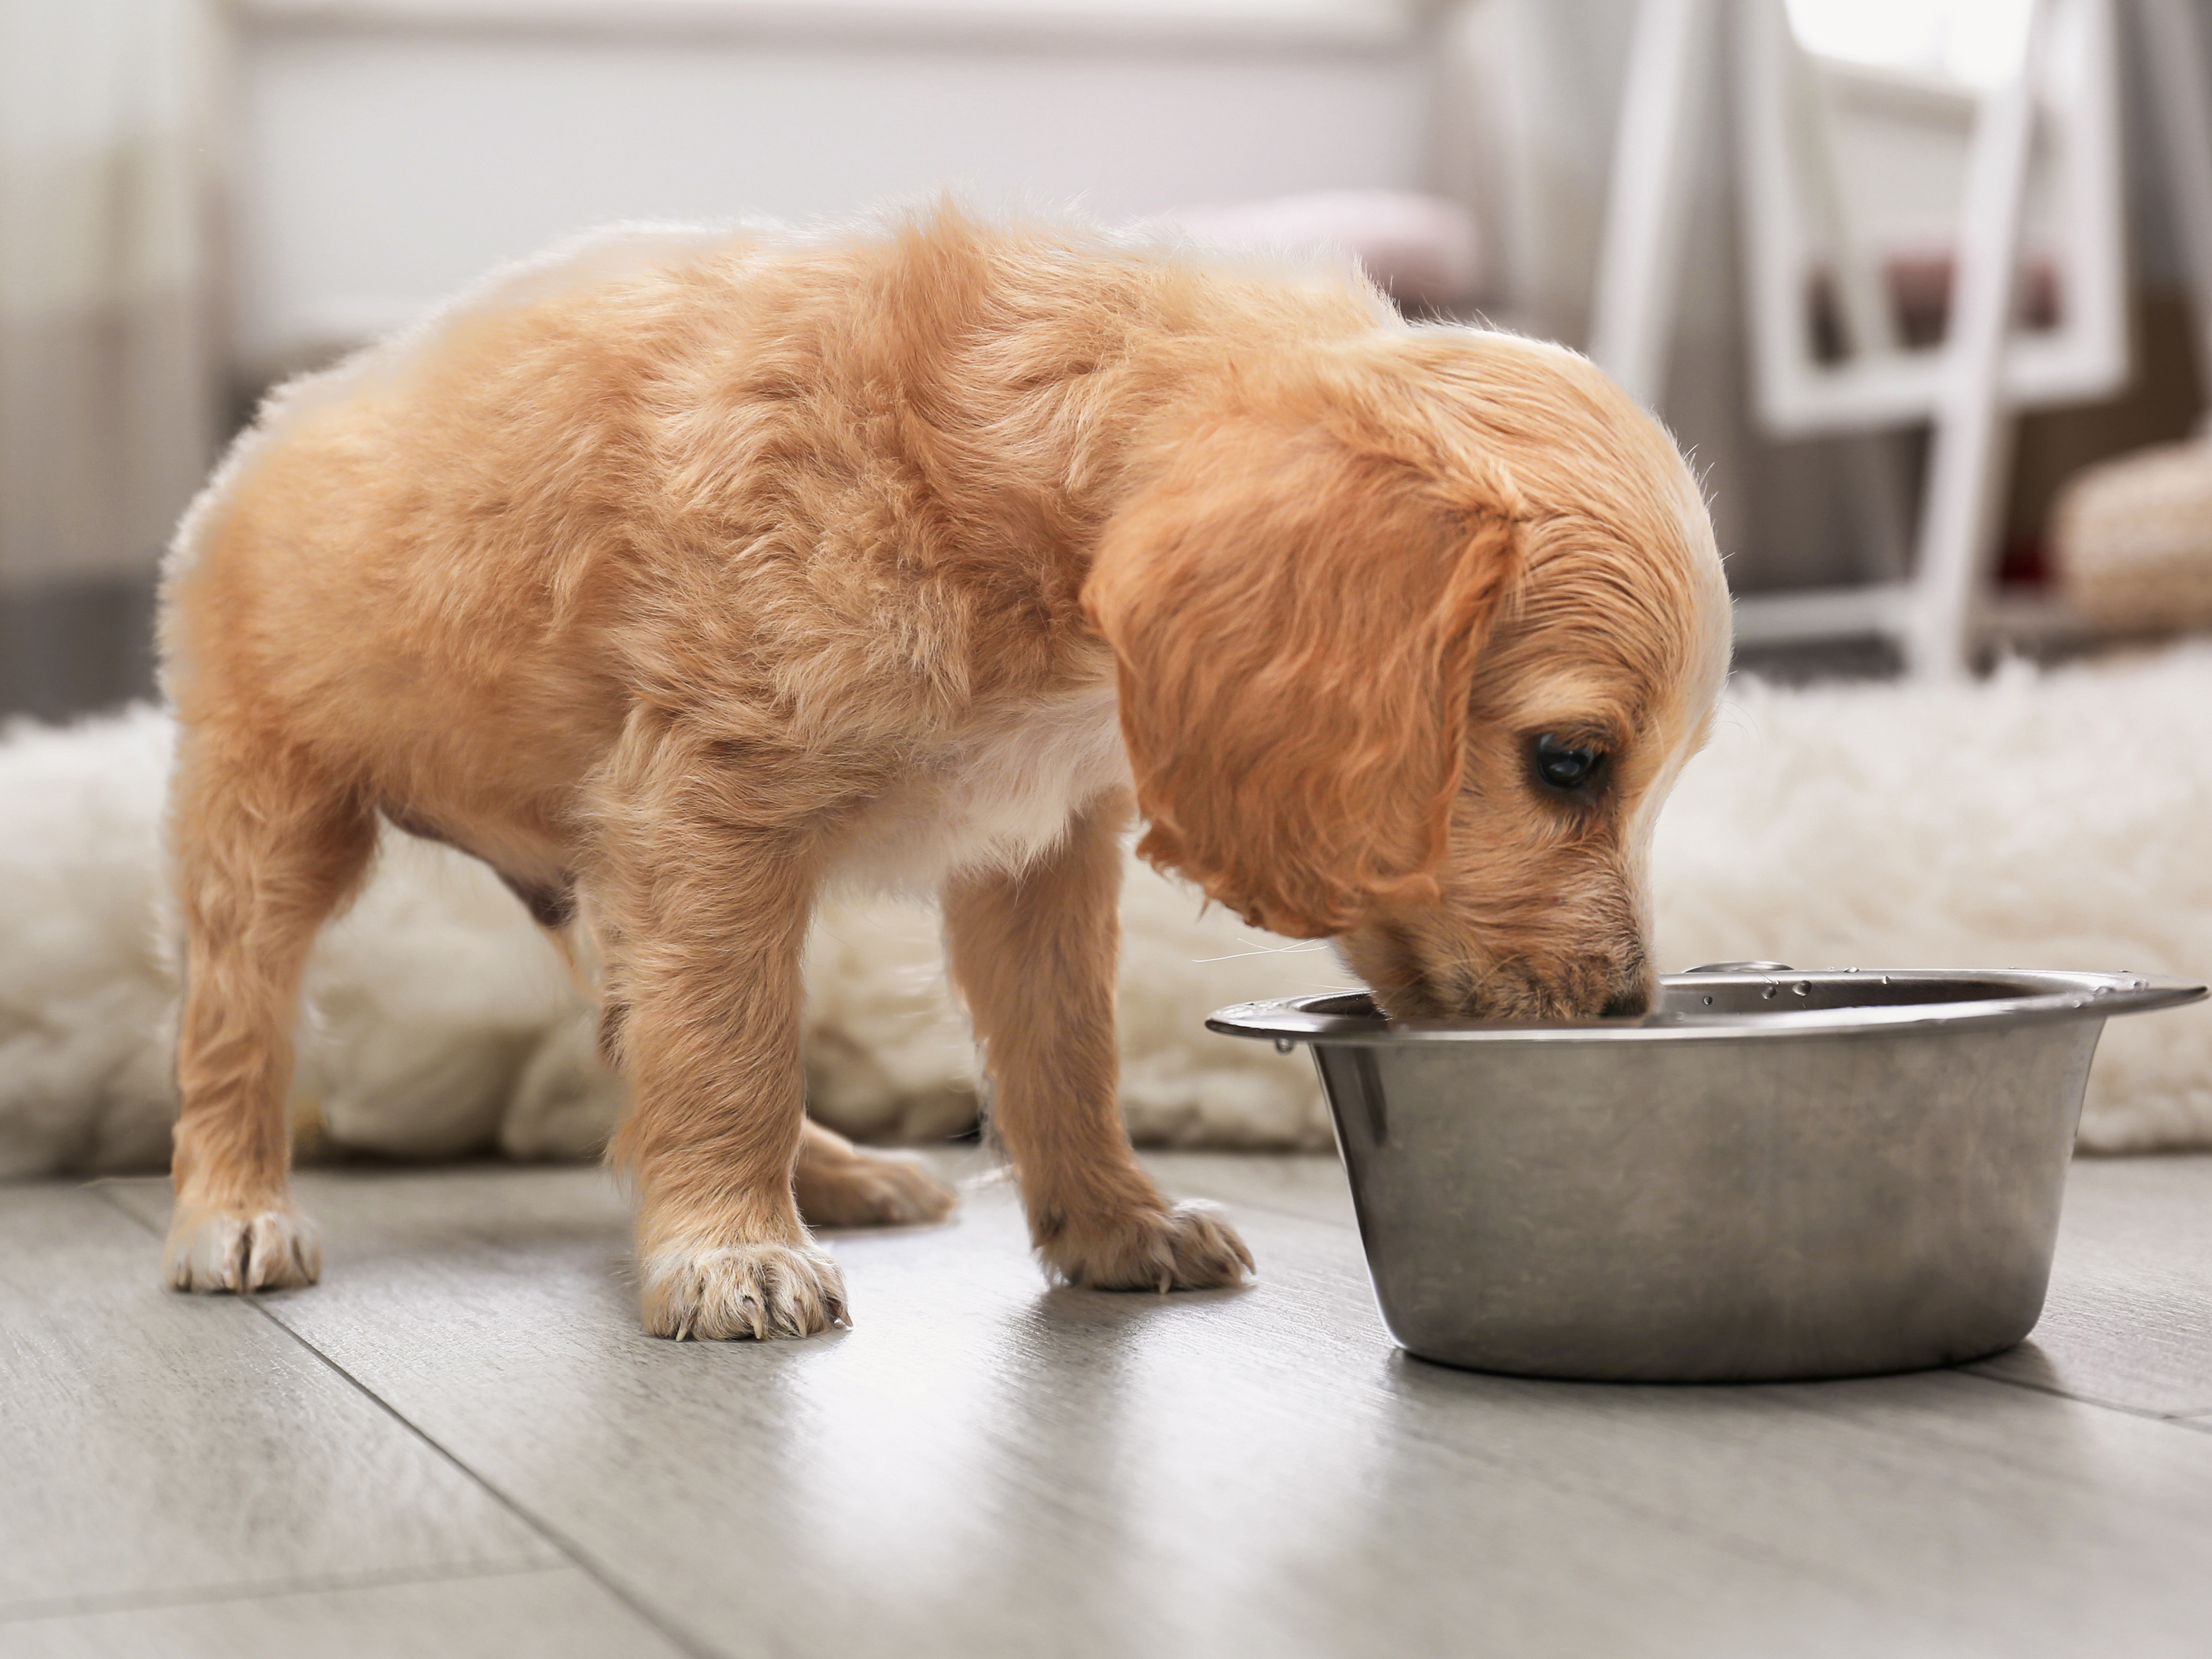 pfcb1 english cocker spaniel puppy standing indoors eating from a stainless steel feeding bowl